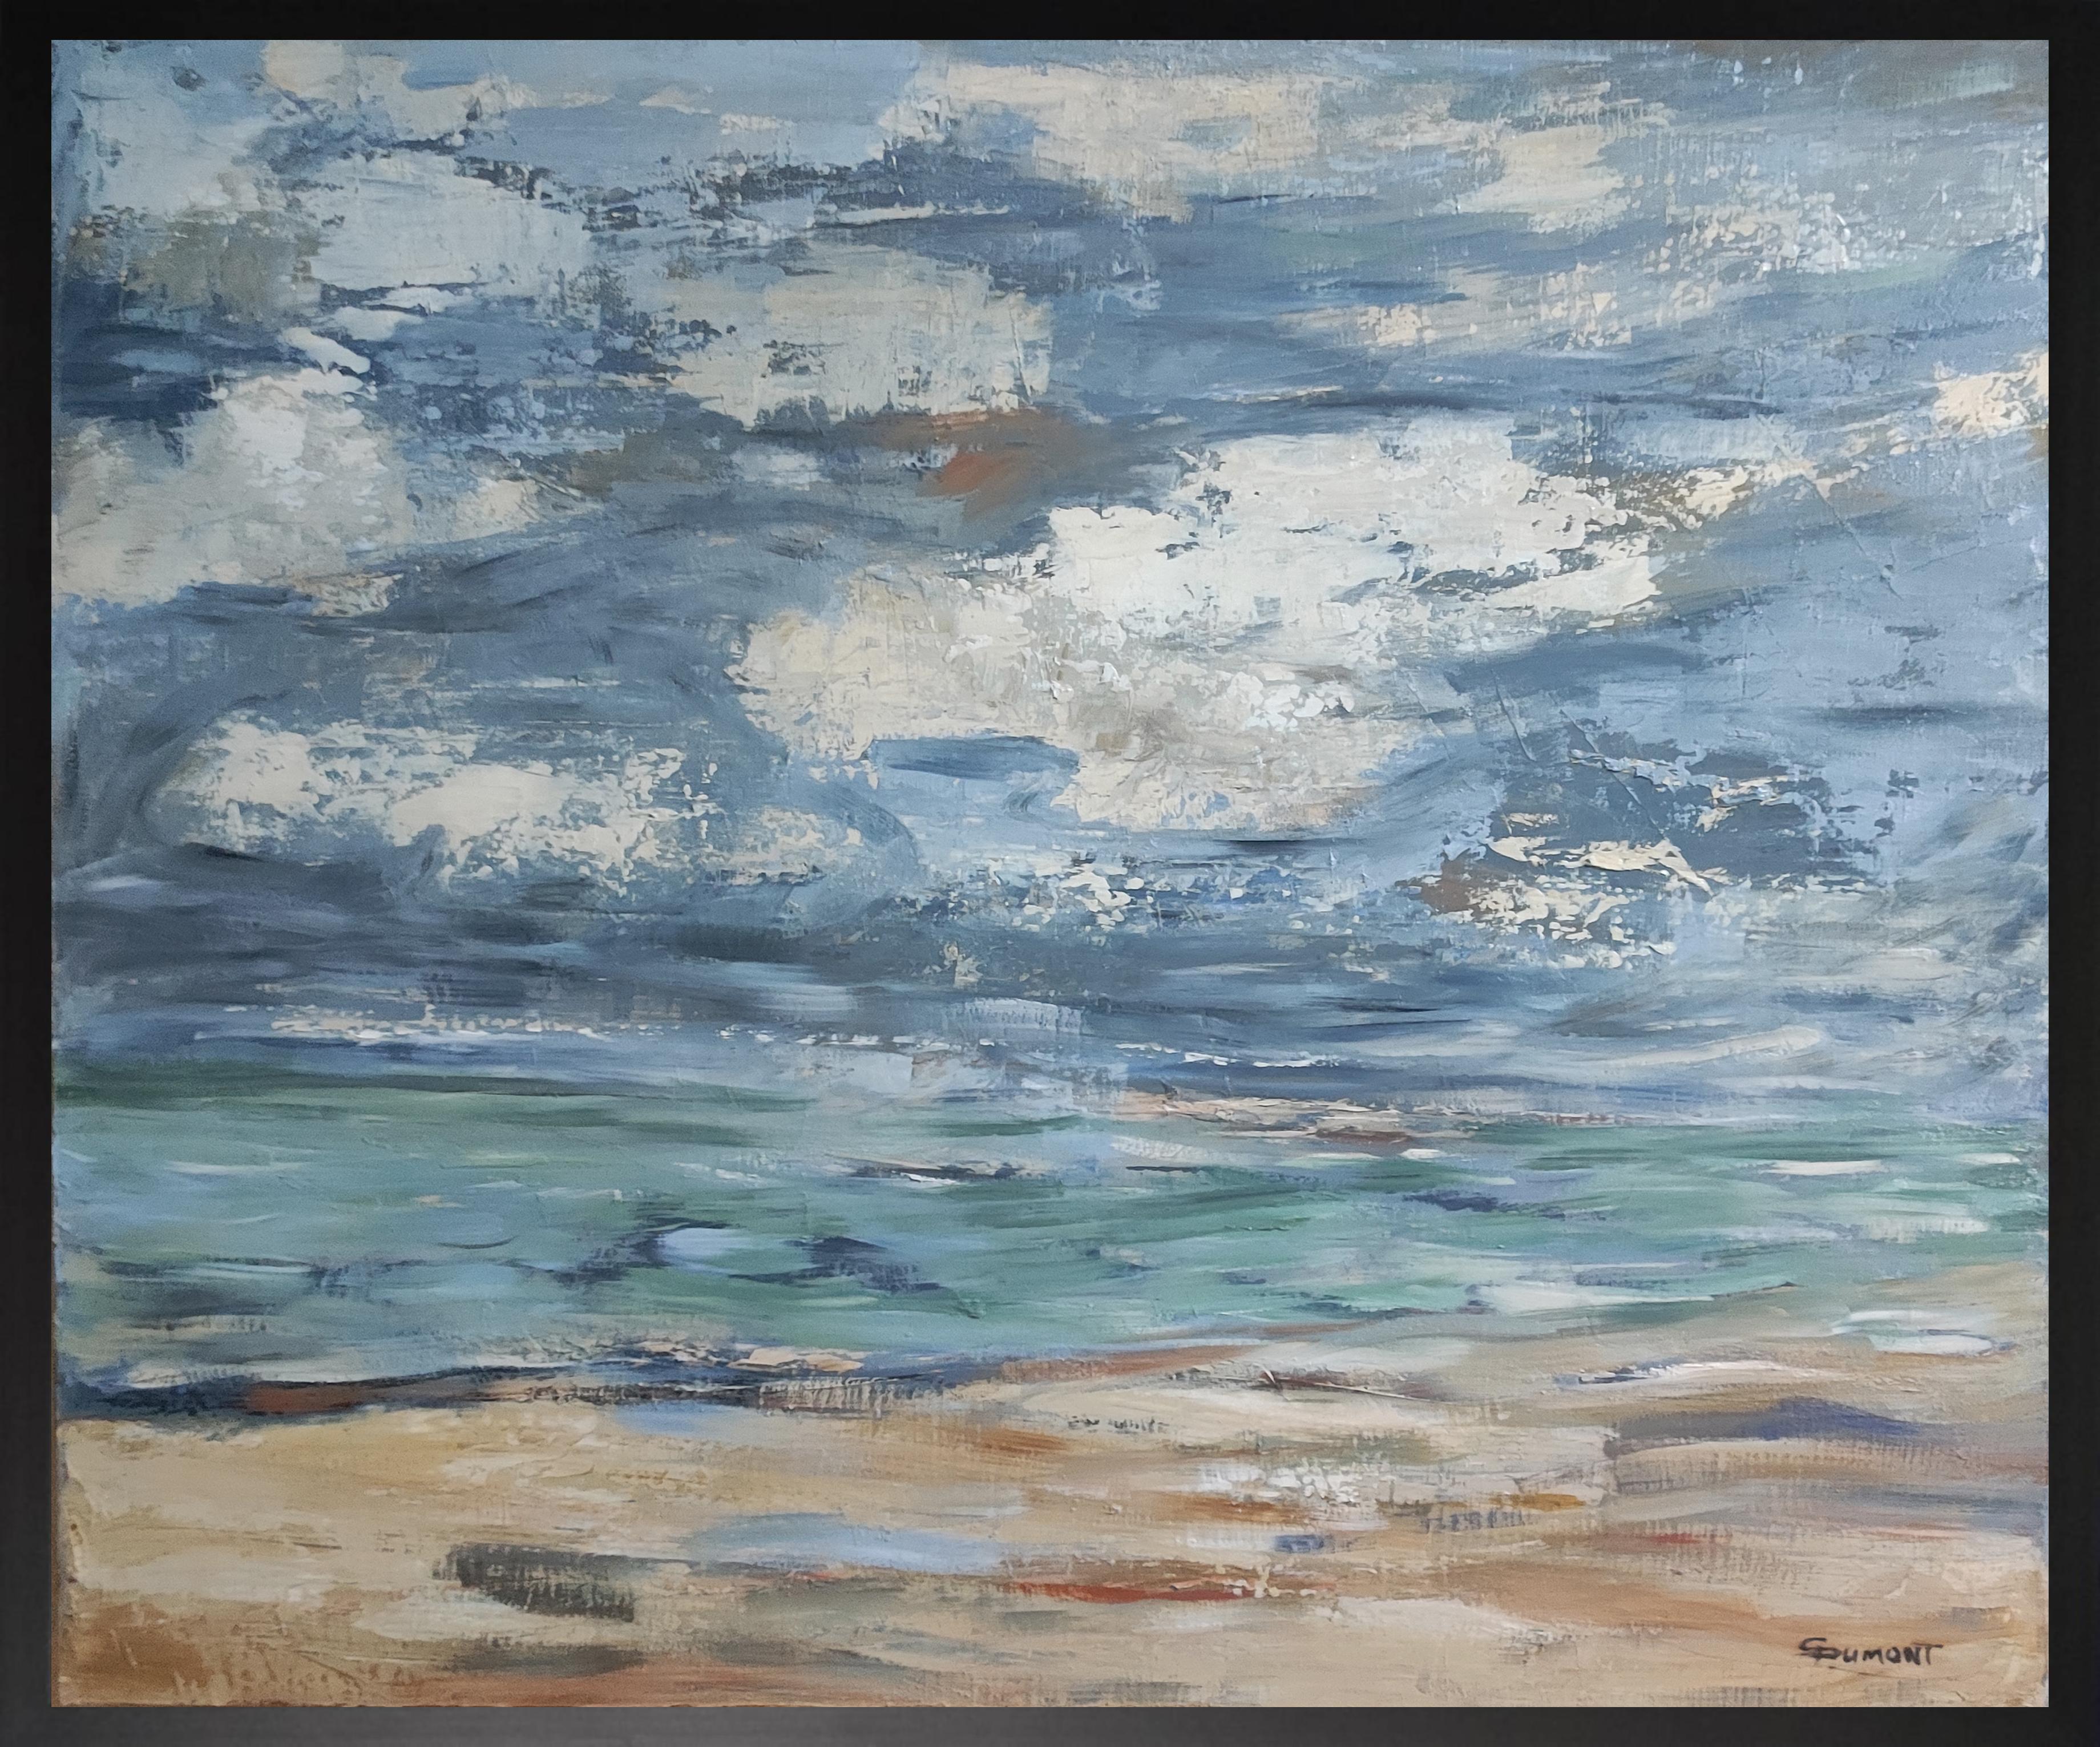 SOPHIE DUMONT Abstract Painting - Deauville, beach, seaside, figurative, contemporary, blue, impressionism